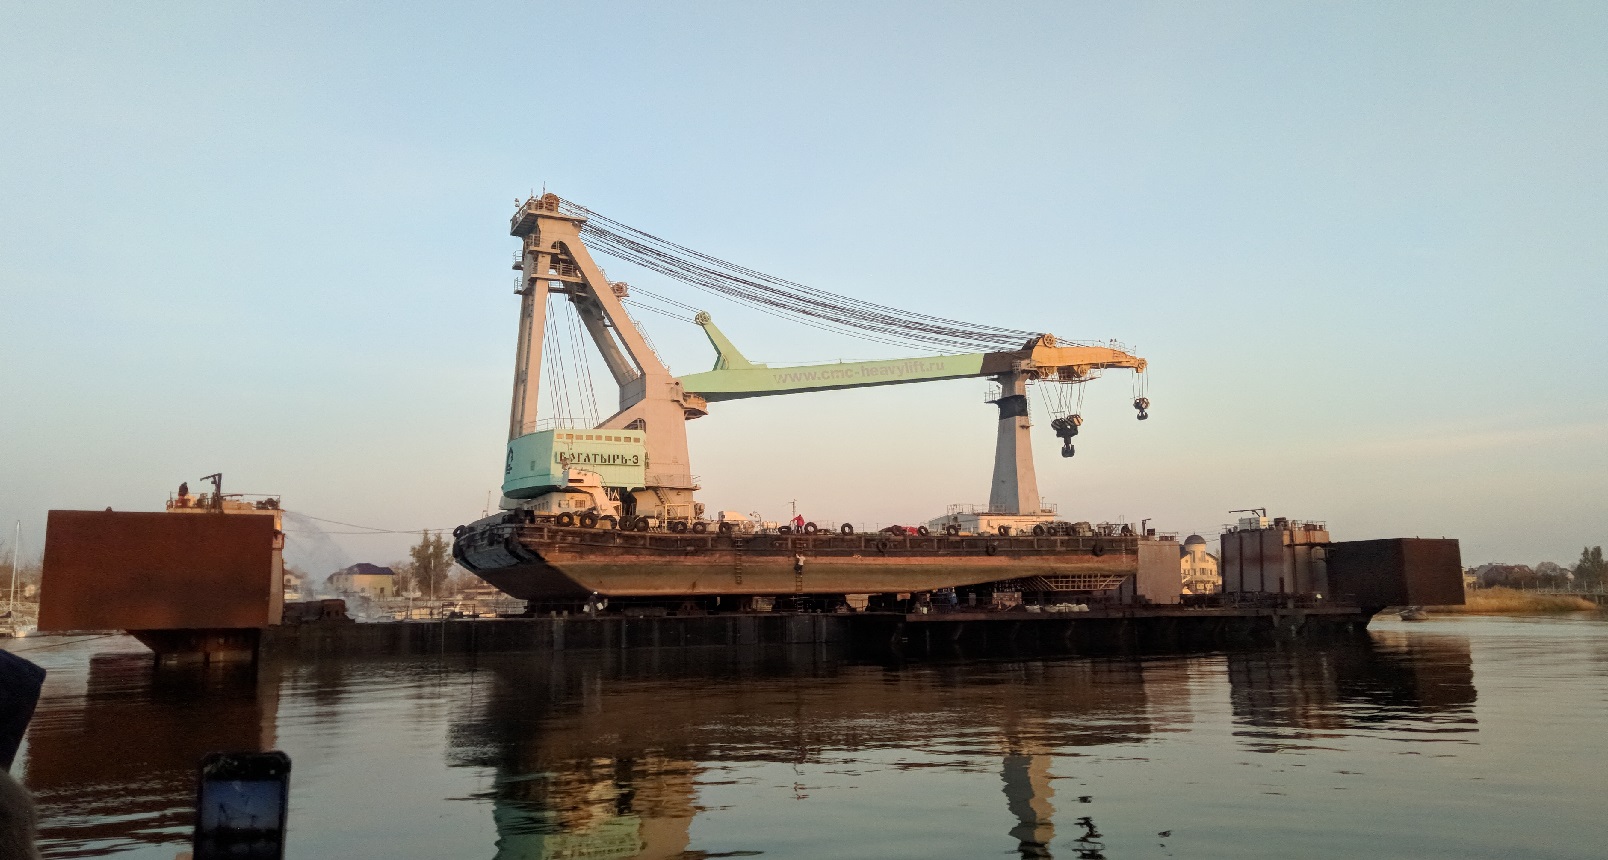 LLC "KMK" with the help of TP "Margon" the lifting of the floating crane "Bogatyr-3" was carried out